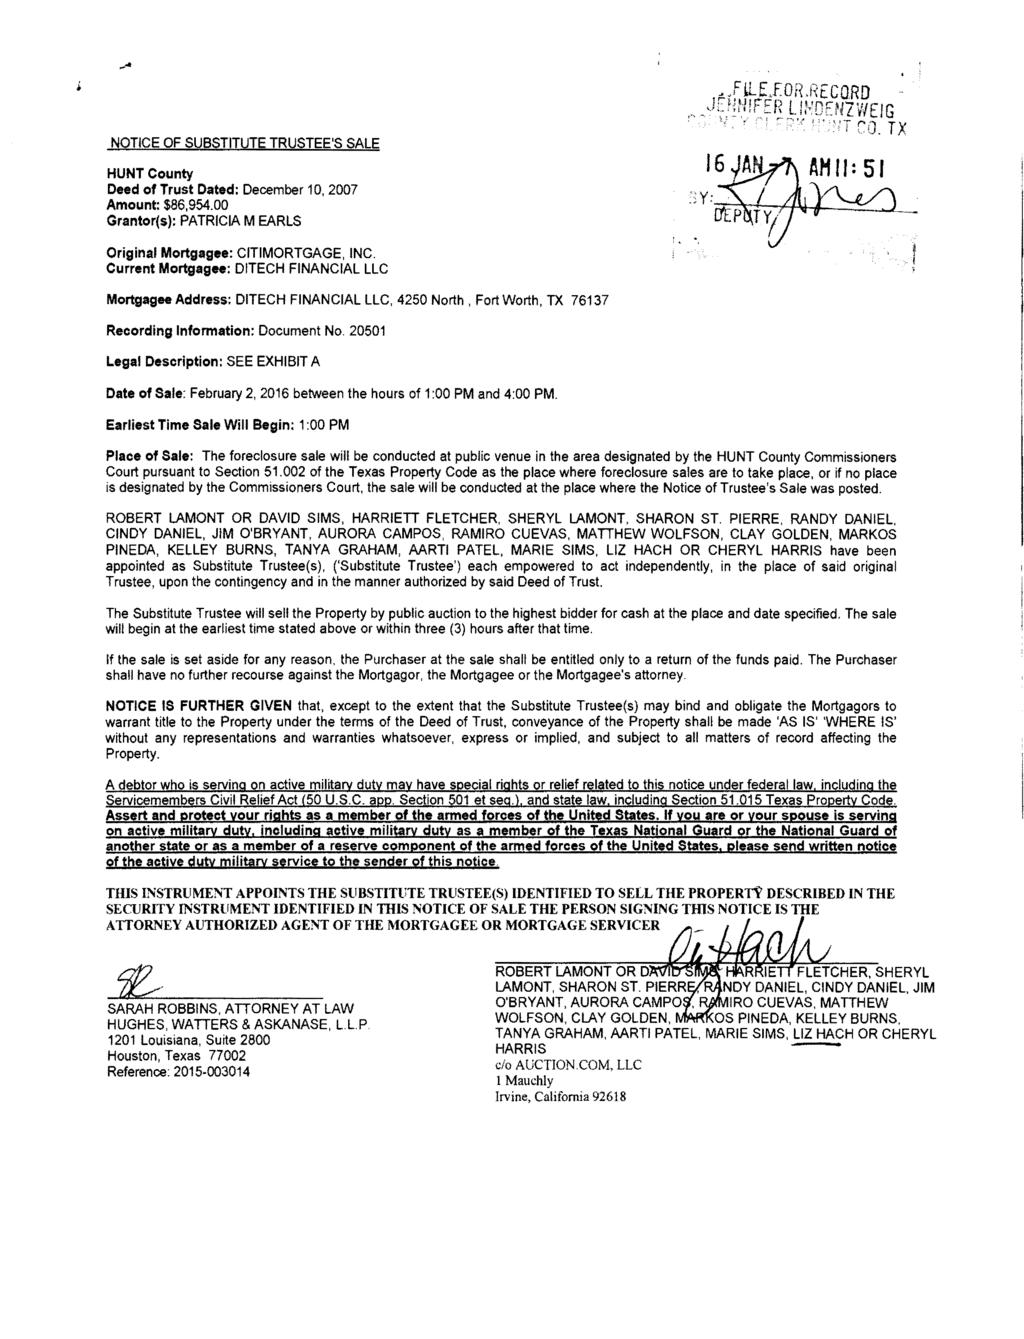 NOTICE OF SUBSTITUTE TRUSTEE'S SALE HUNT County Deed of Trust Dated: December 10, 2007 Amount: $86,954.00 Grantor(s): PATRICIA M EARLS Original Mortgagee: CITIMORTGAGE, INC.